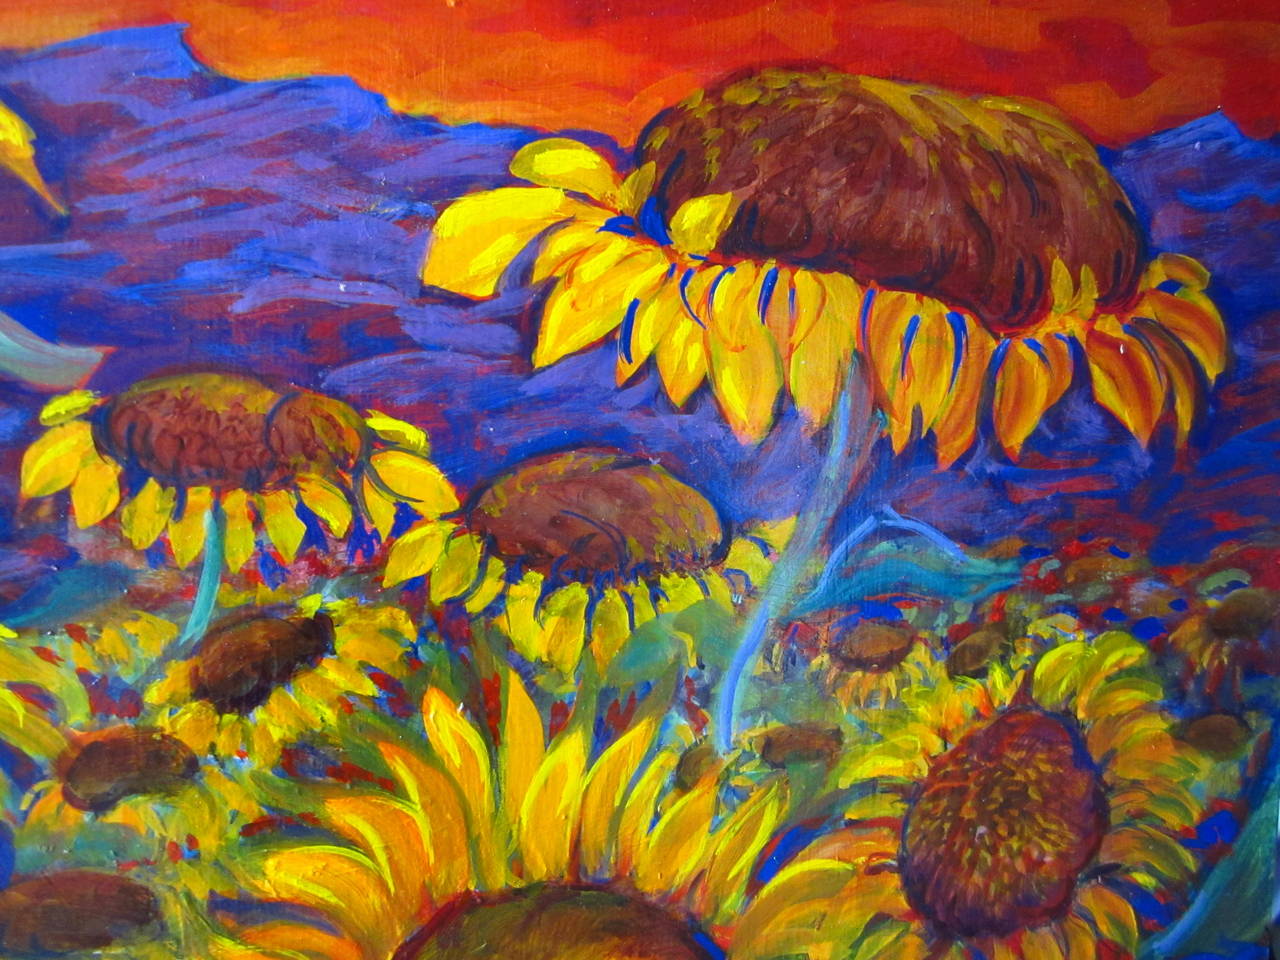 Sunflower fields is a painting made by Evelyne Ballestra, a French contemporary artist. This piece is a part of a flower series, defined by their distinct bright colors, satiny, silky, vibrating materials and form. The flower series is reminiscent